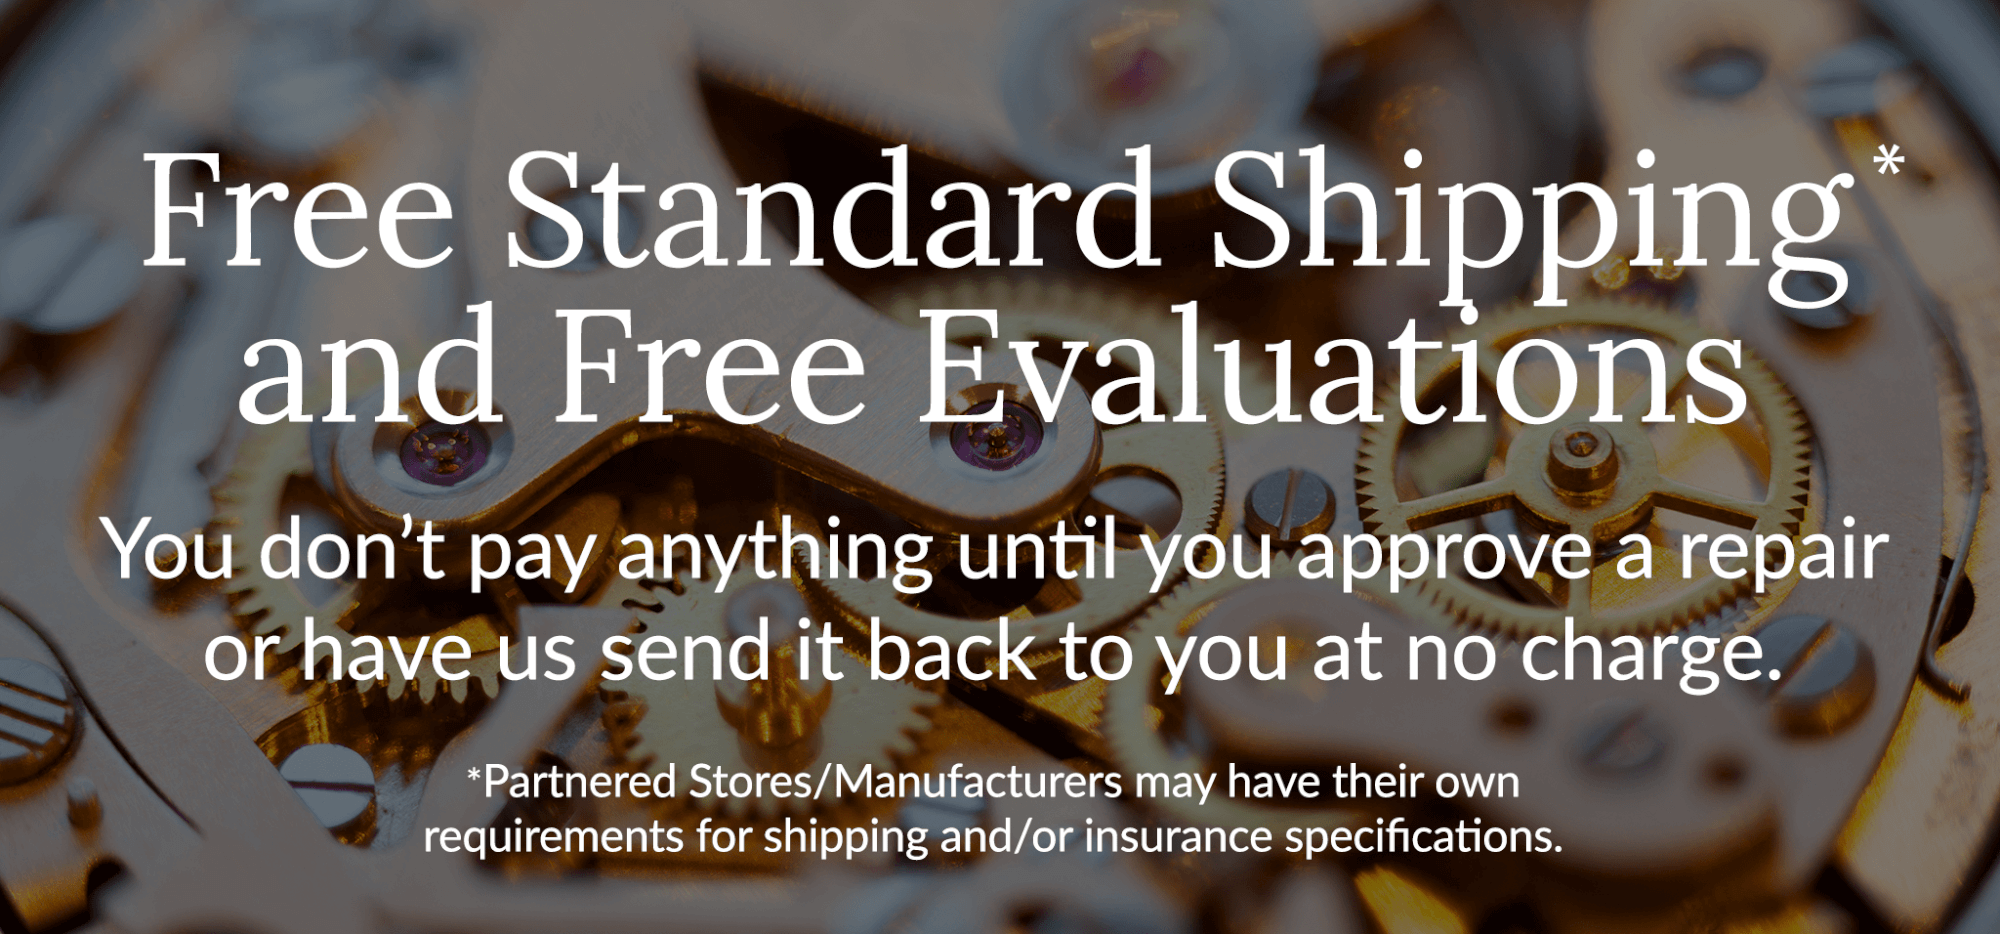 Banner Showing Free Evaluations & Shipping for Watch Movement Repair Servicing